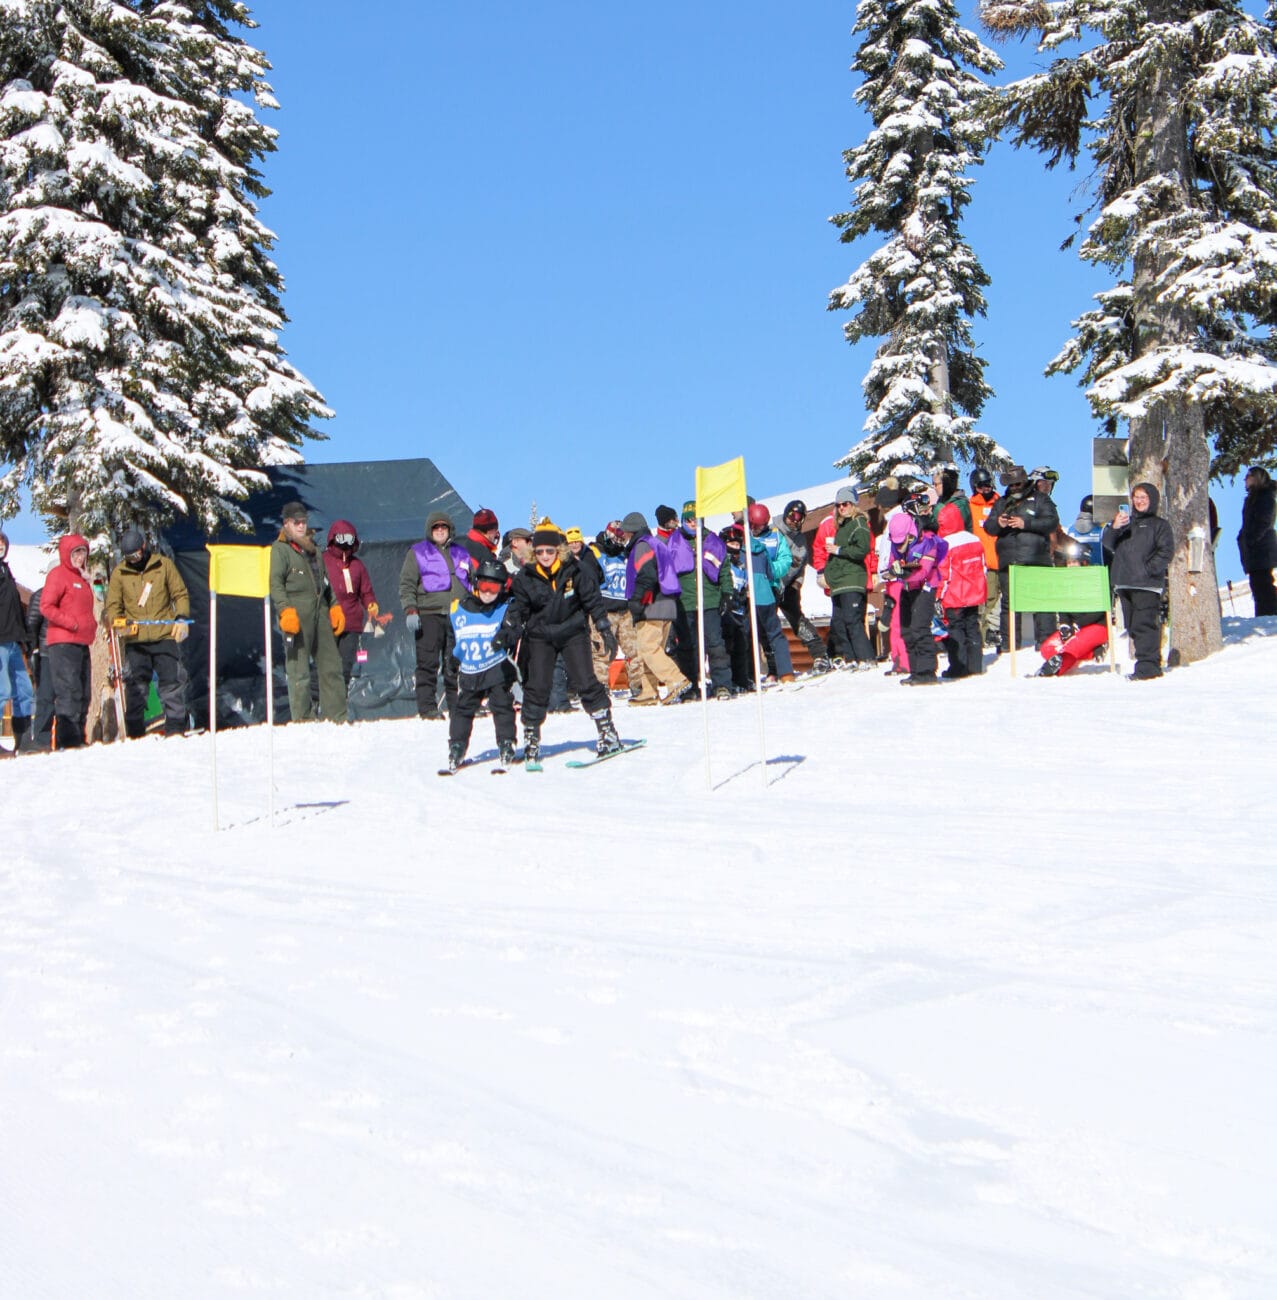 A group of people on skis participating in the Winter Special Olympics.